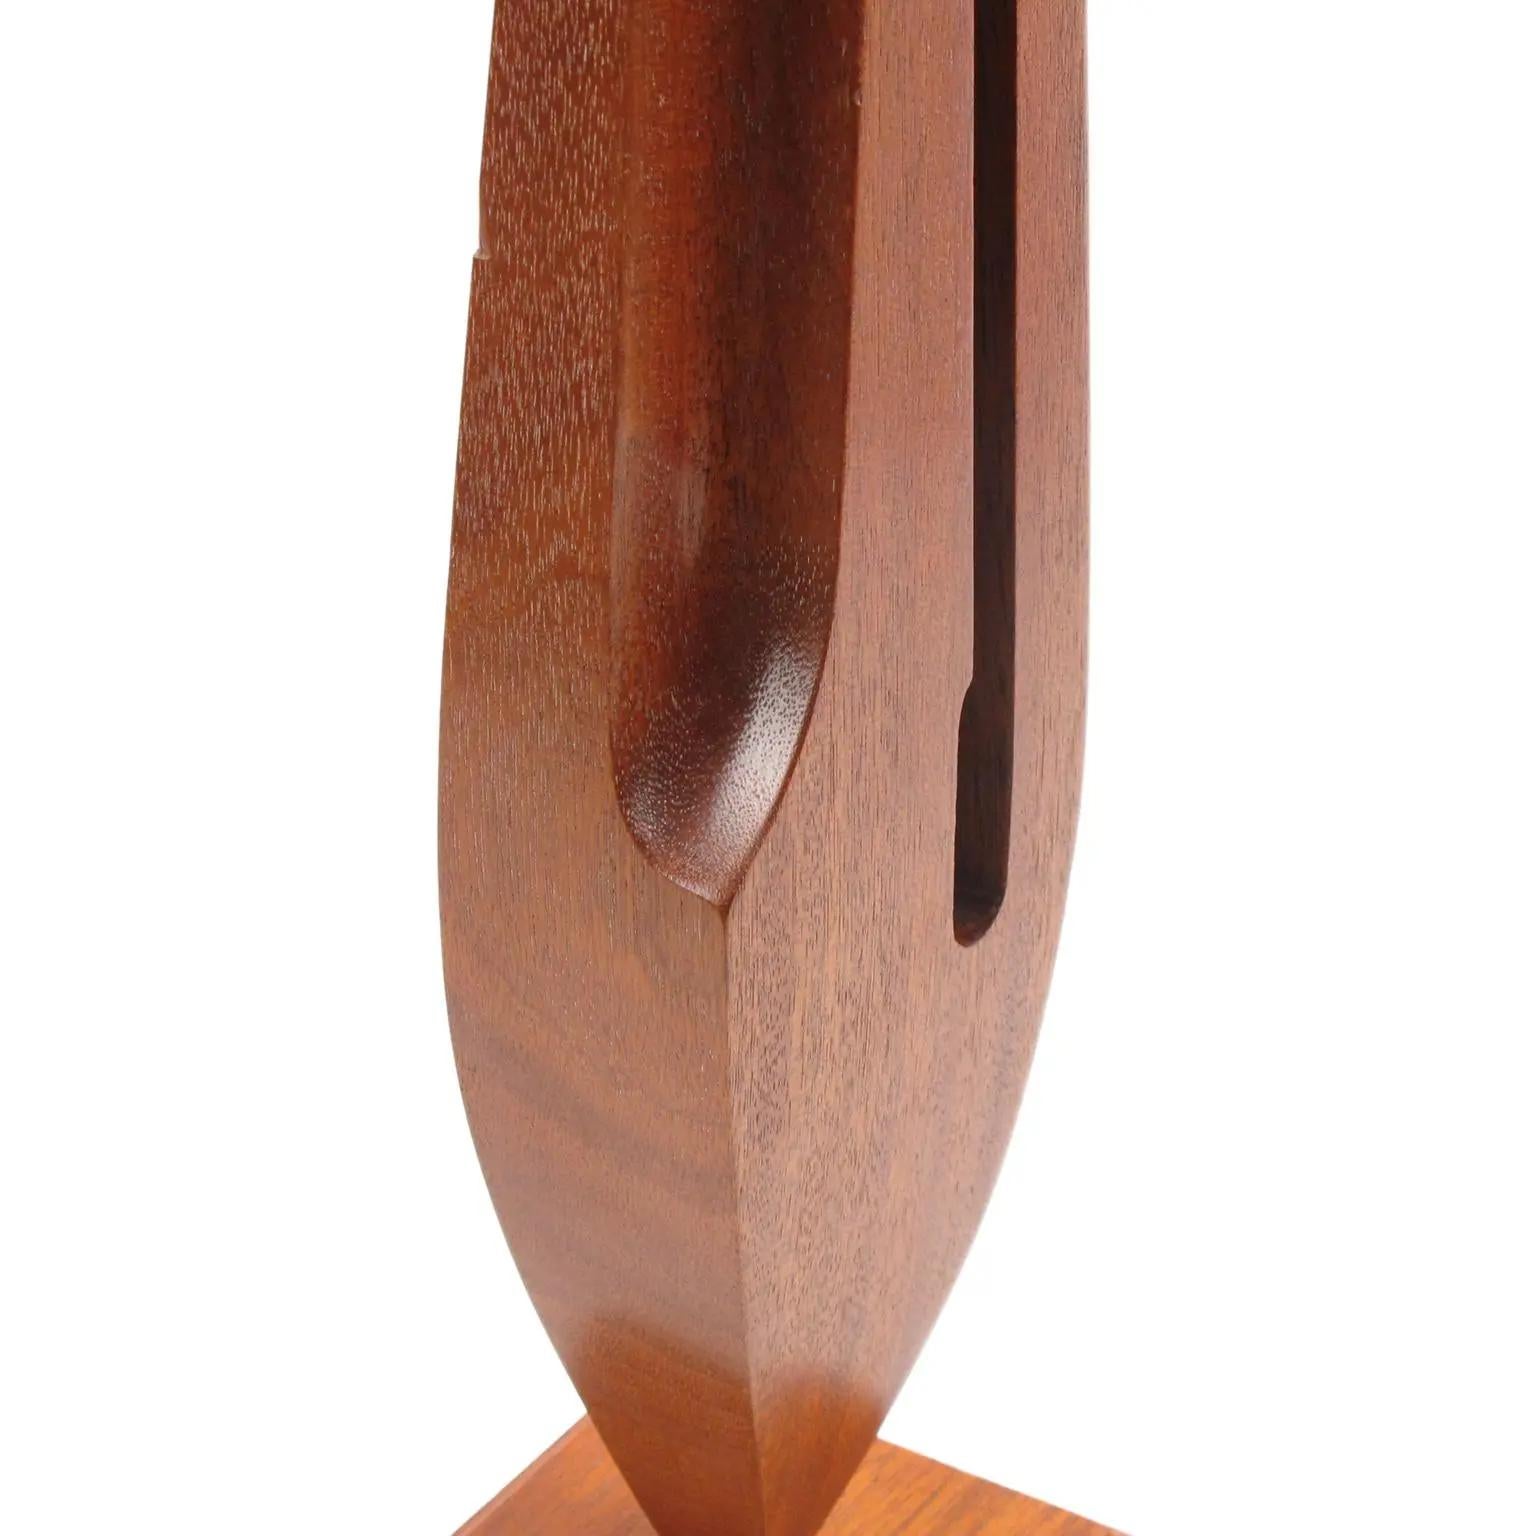 20th Century Architectural Wooden Ornament Sculpture Tuning Fork For Sale